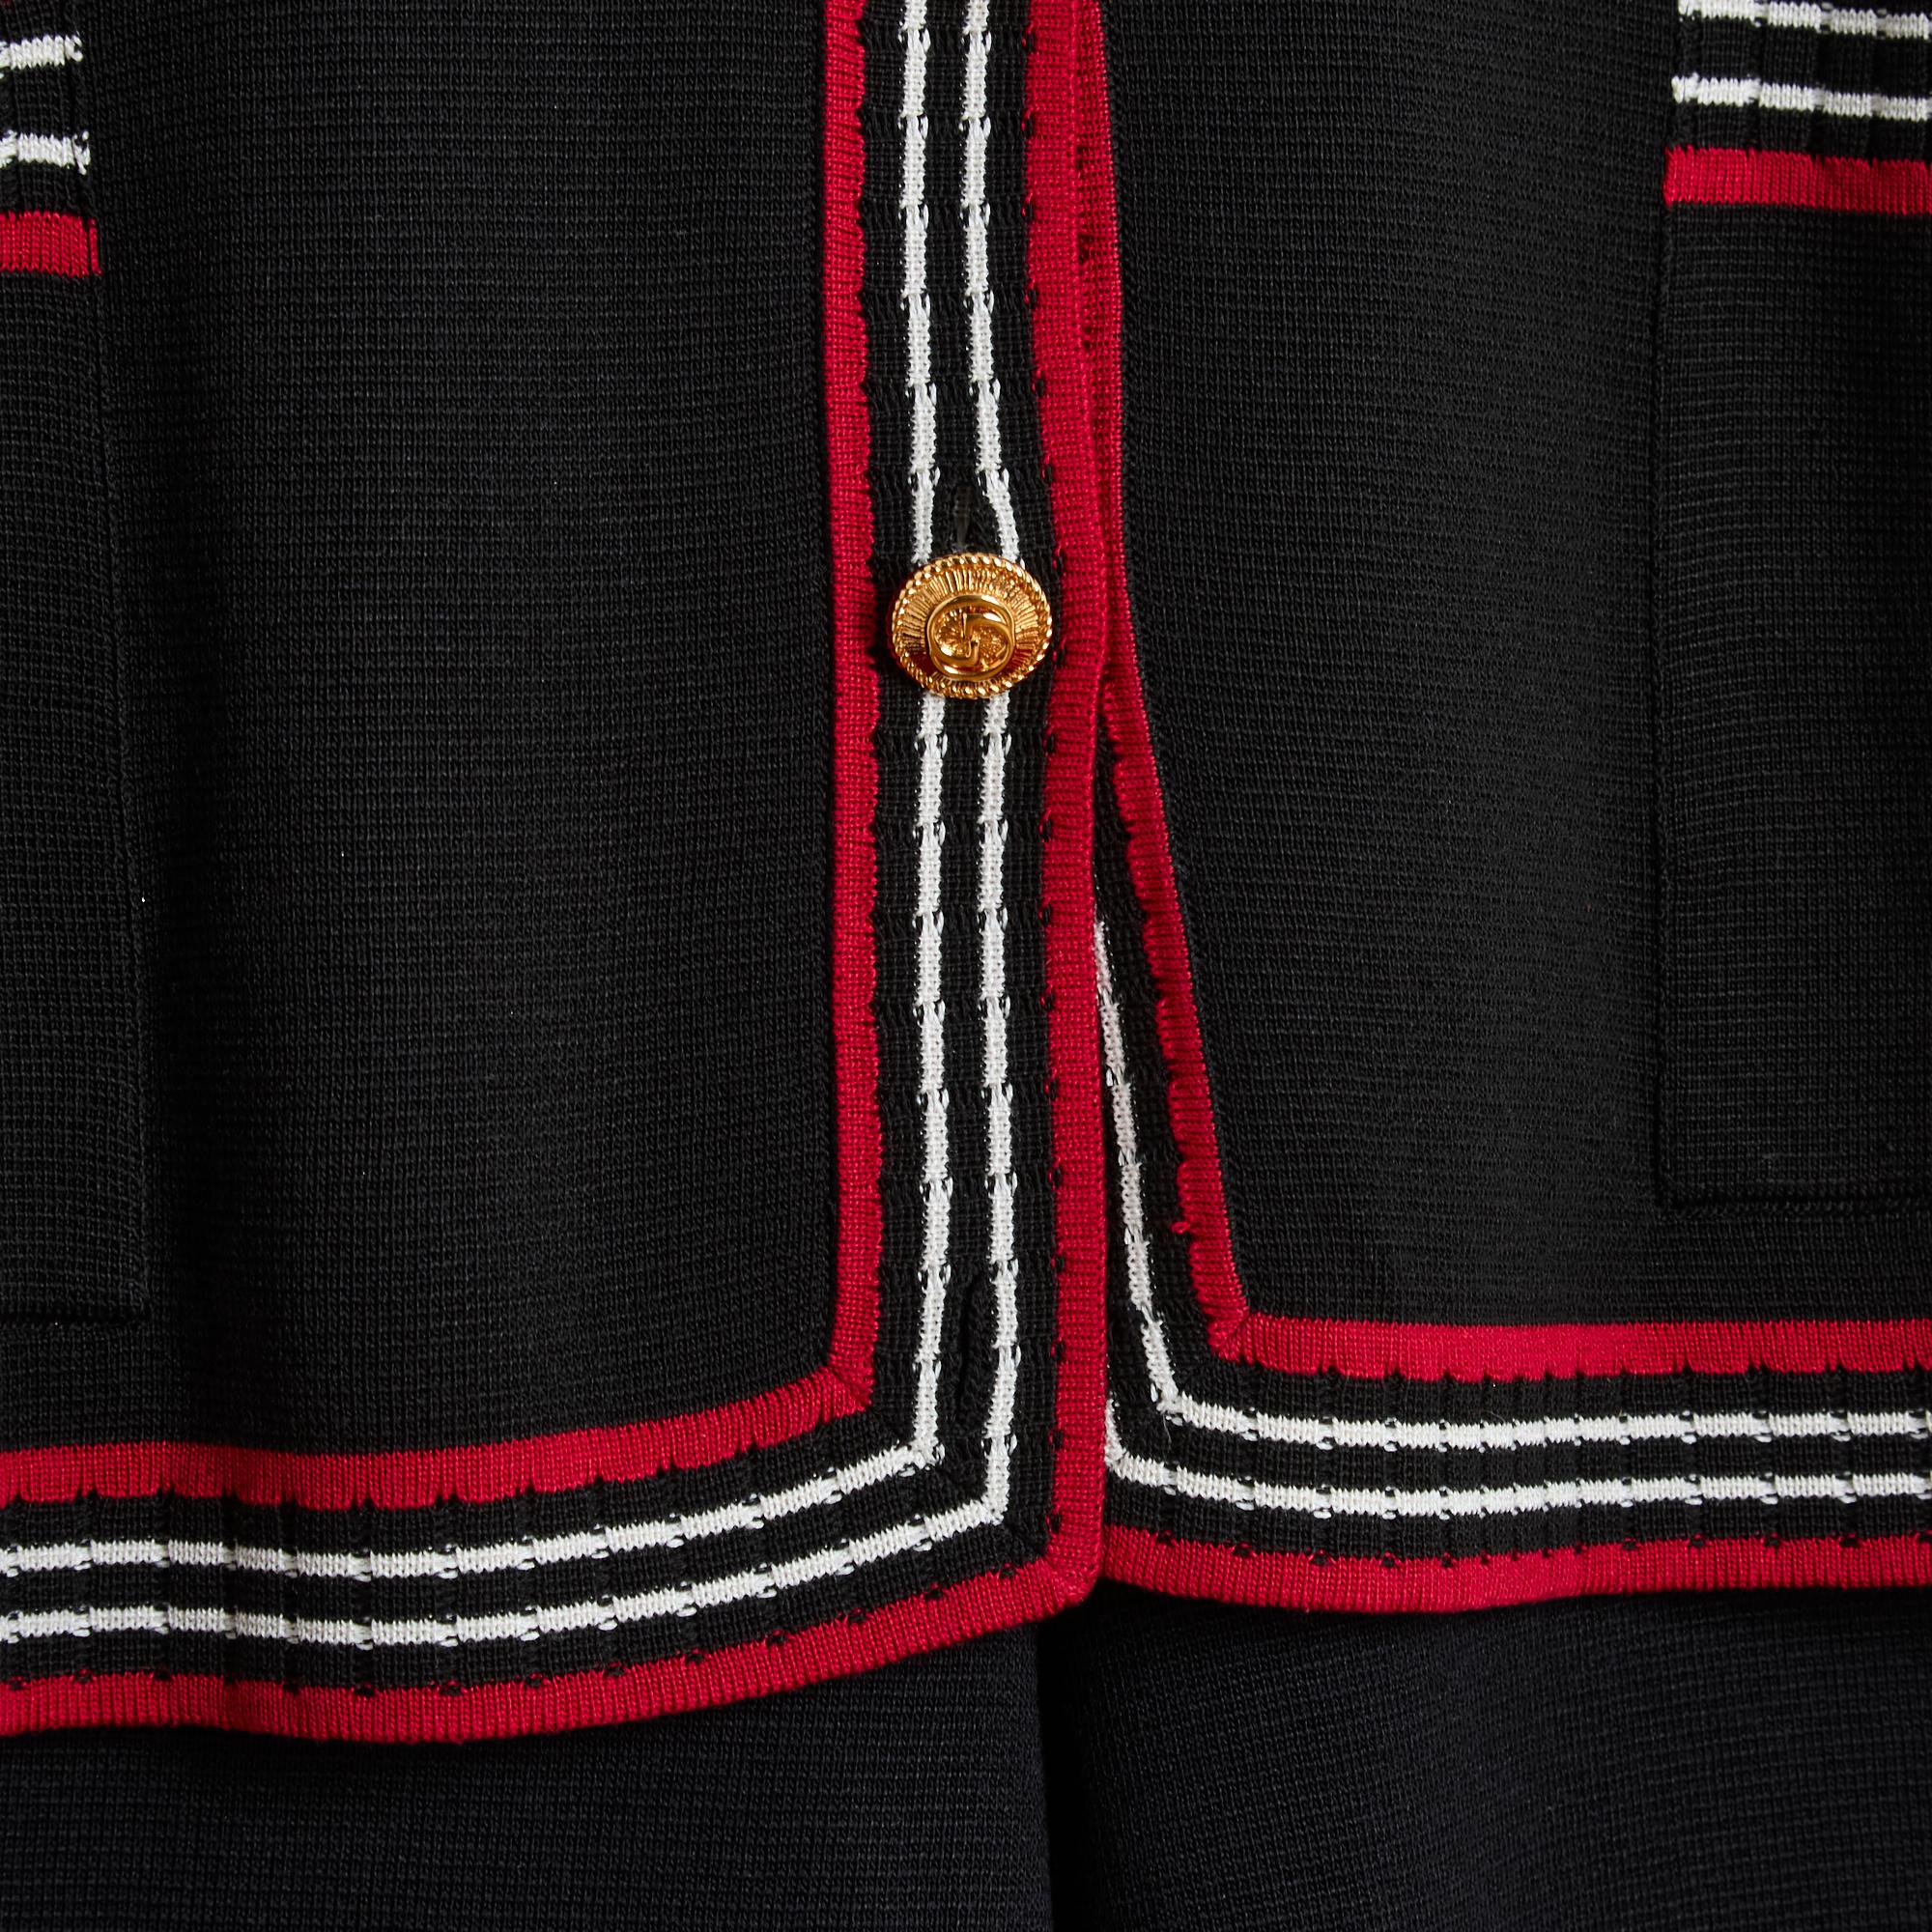 Gucci Pre Fall 2019 collection set by Alessandro Michele in silk knit (28%) and black cotton bordered with a contrasting red black white edging, composed of an oversized volume cardigan, notched collar closed with 4 gold metal buttons, 2 pockets